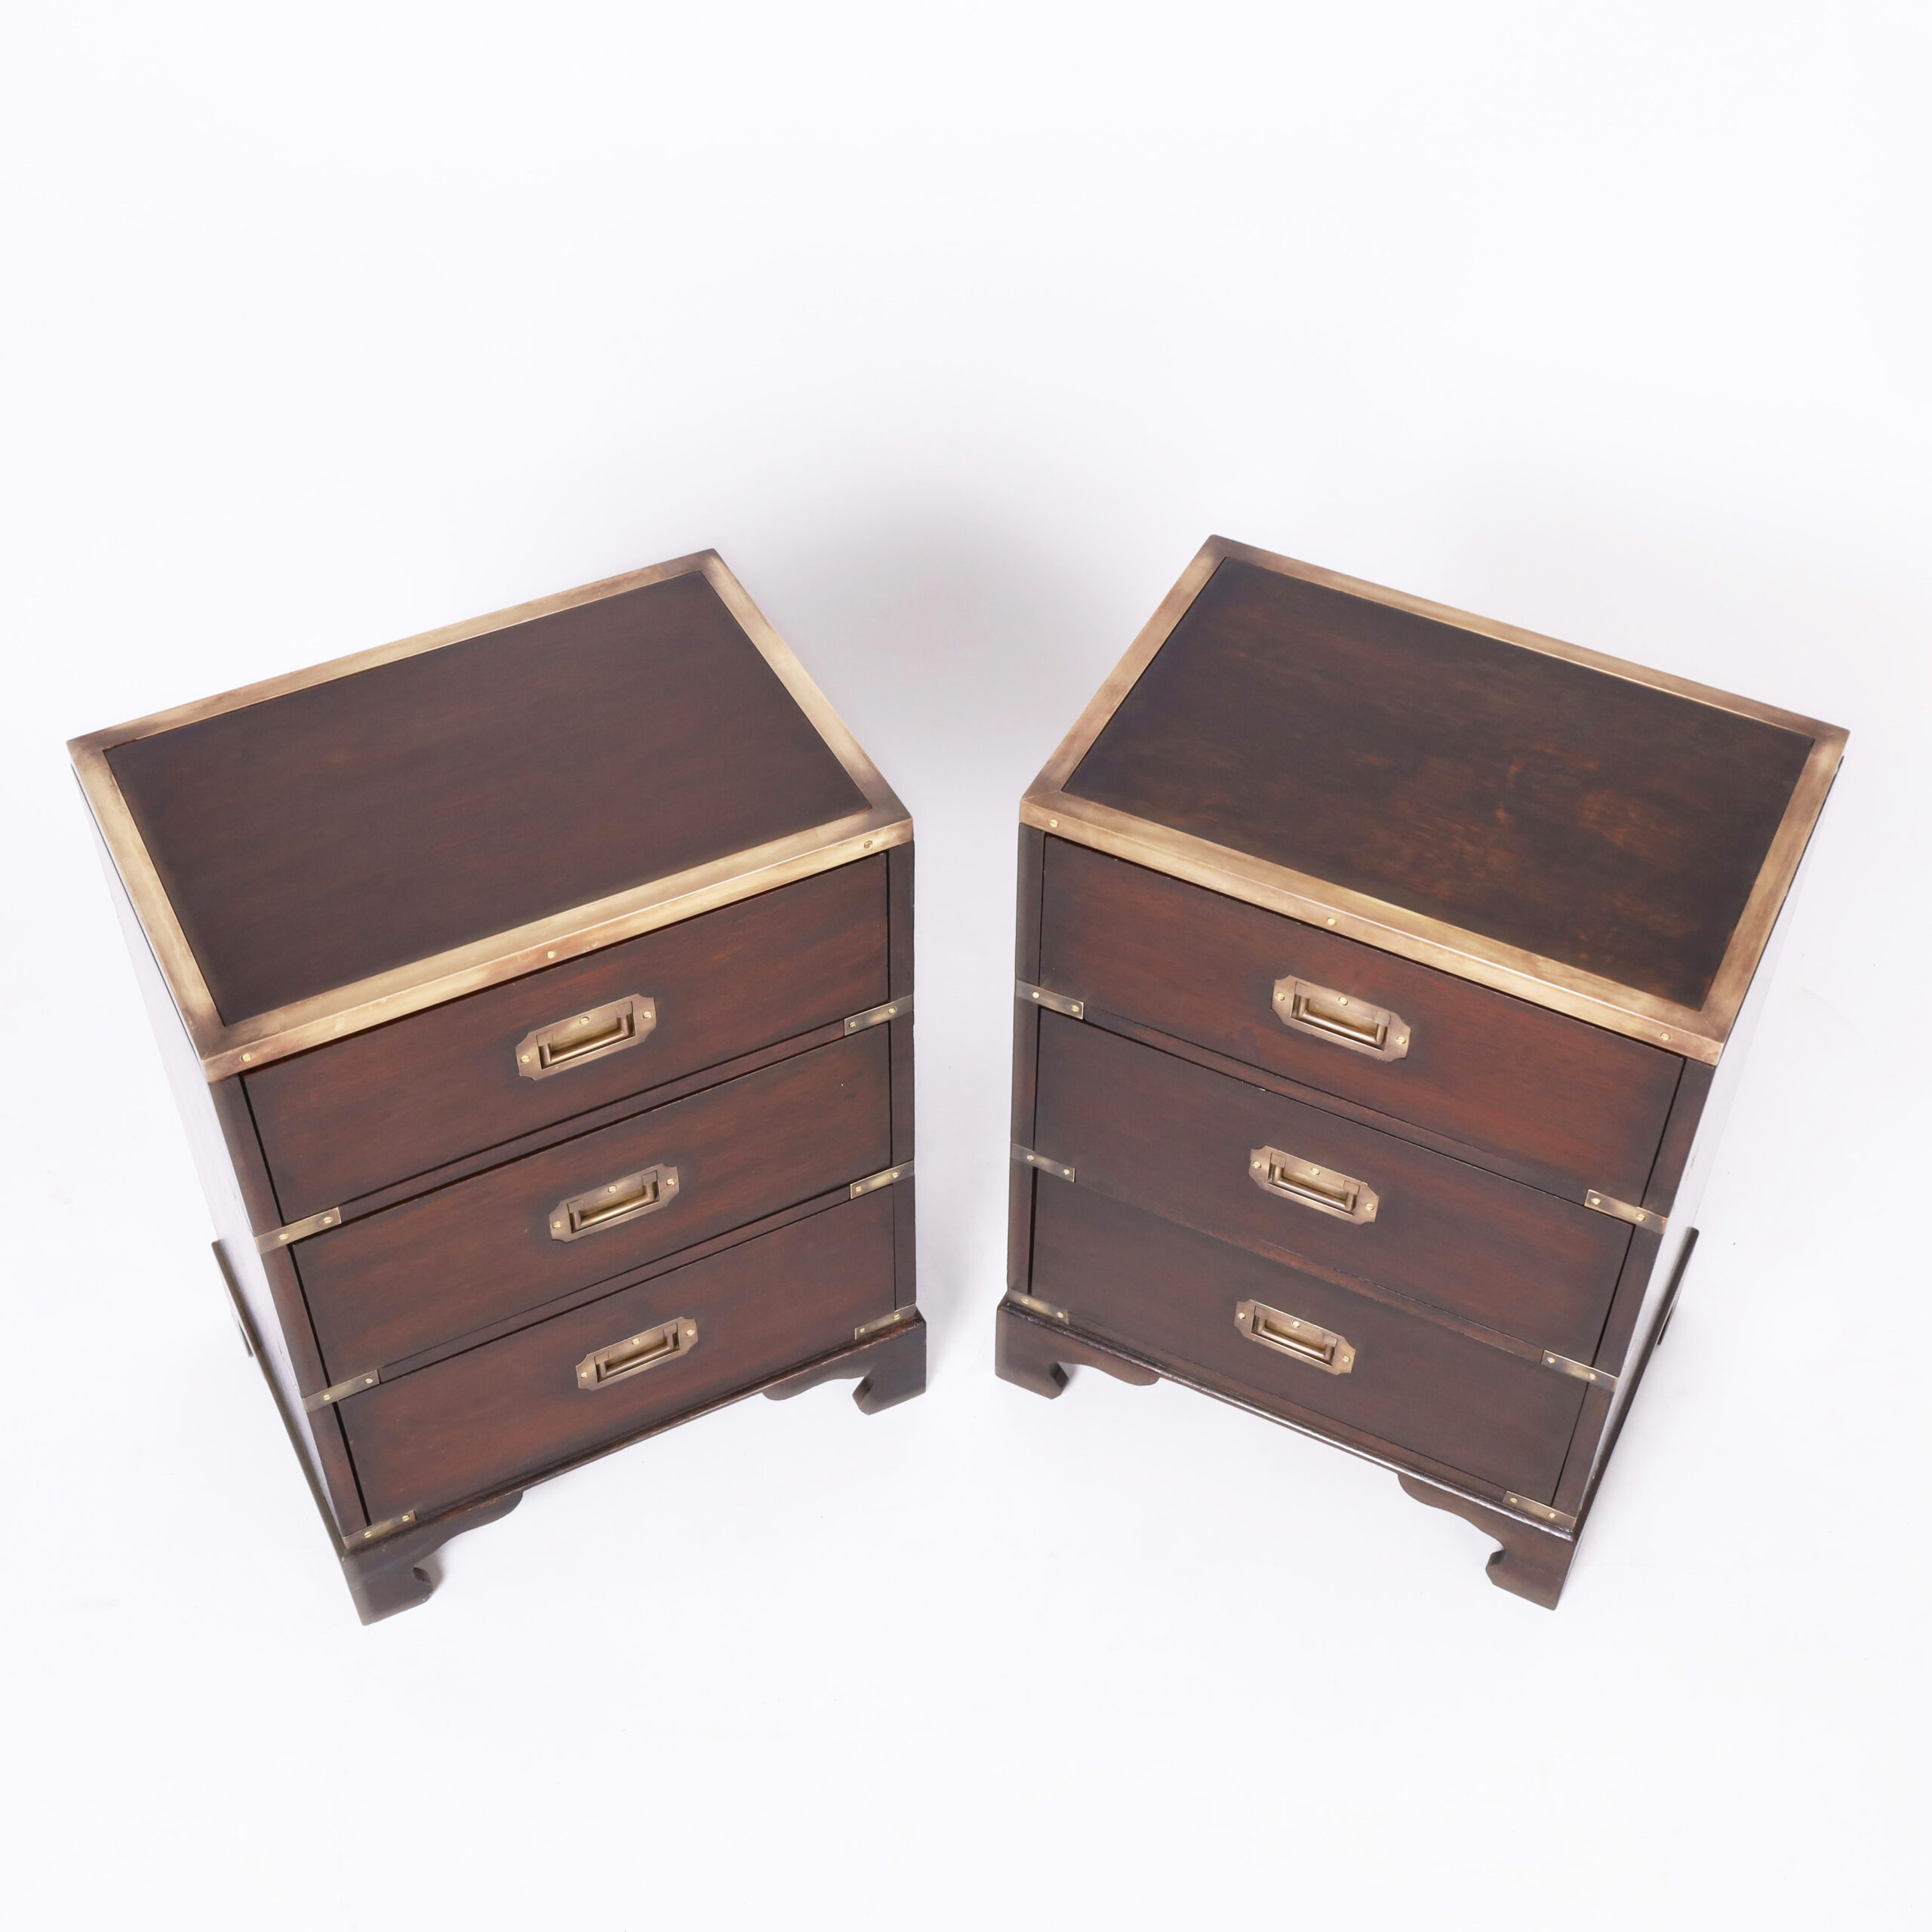 Pair of Antique English Mahogany Campaign Stands